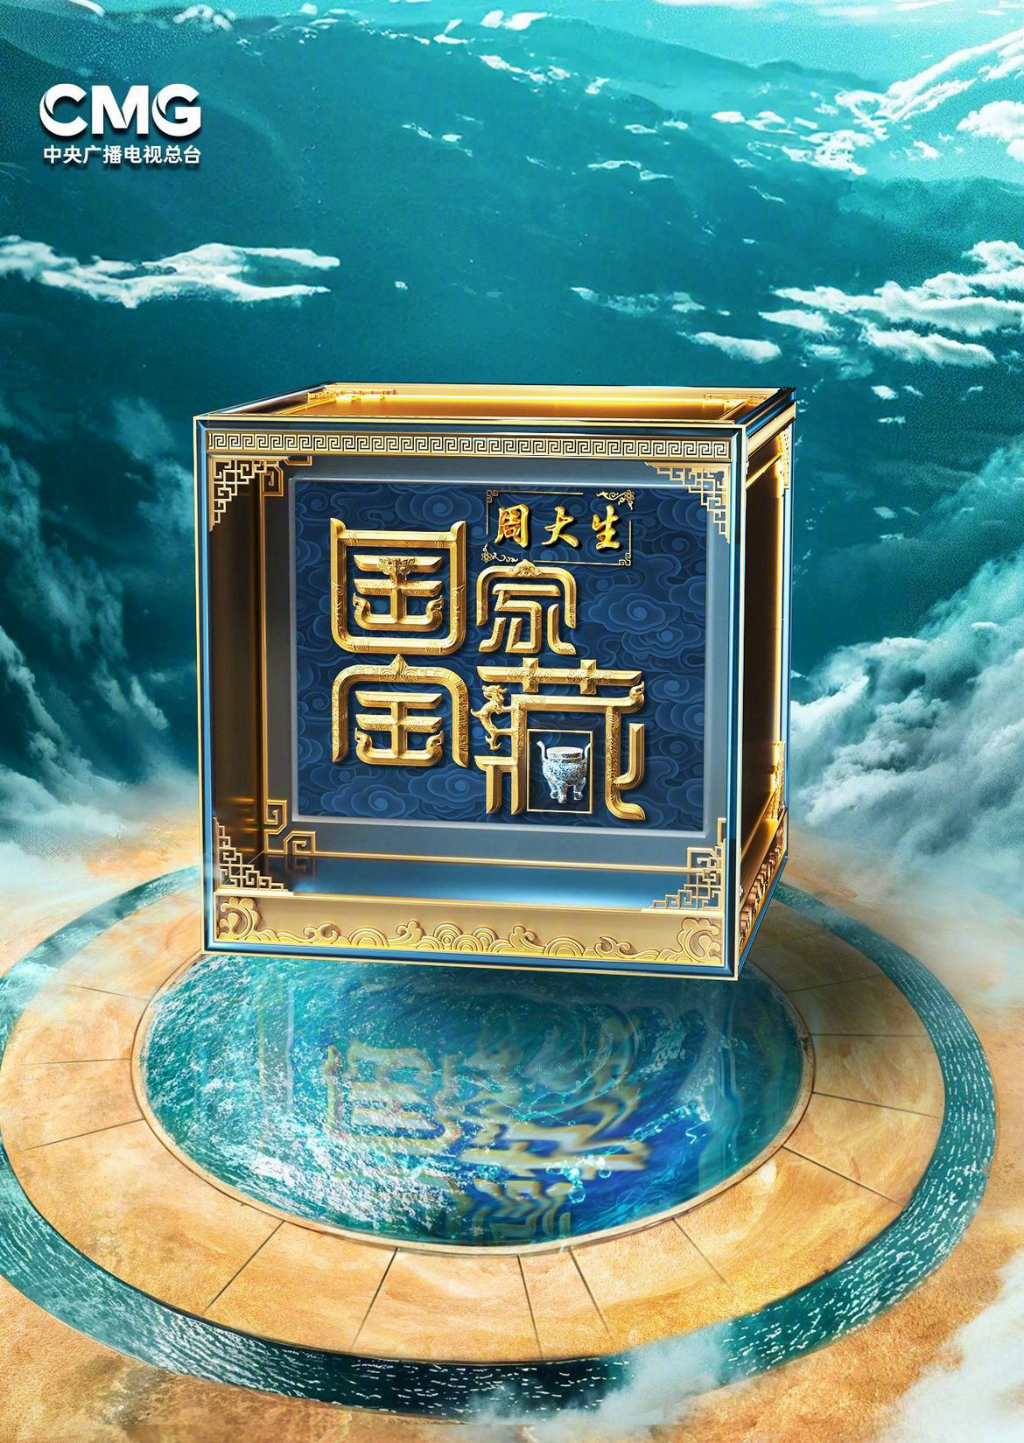 Official poster for the fourth season of National Treasure. (Photo provided by Maoyan Pro)